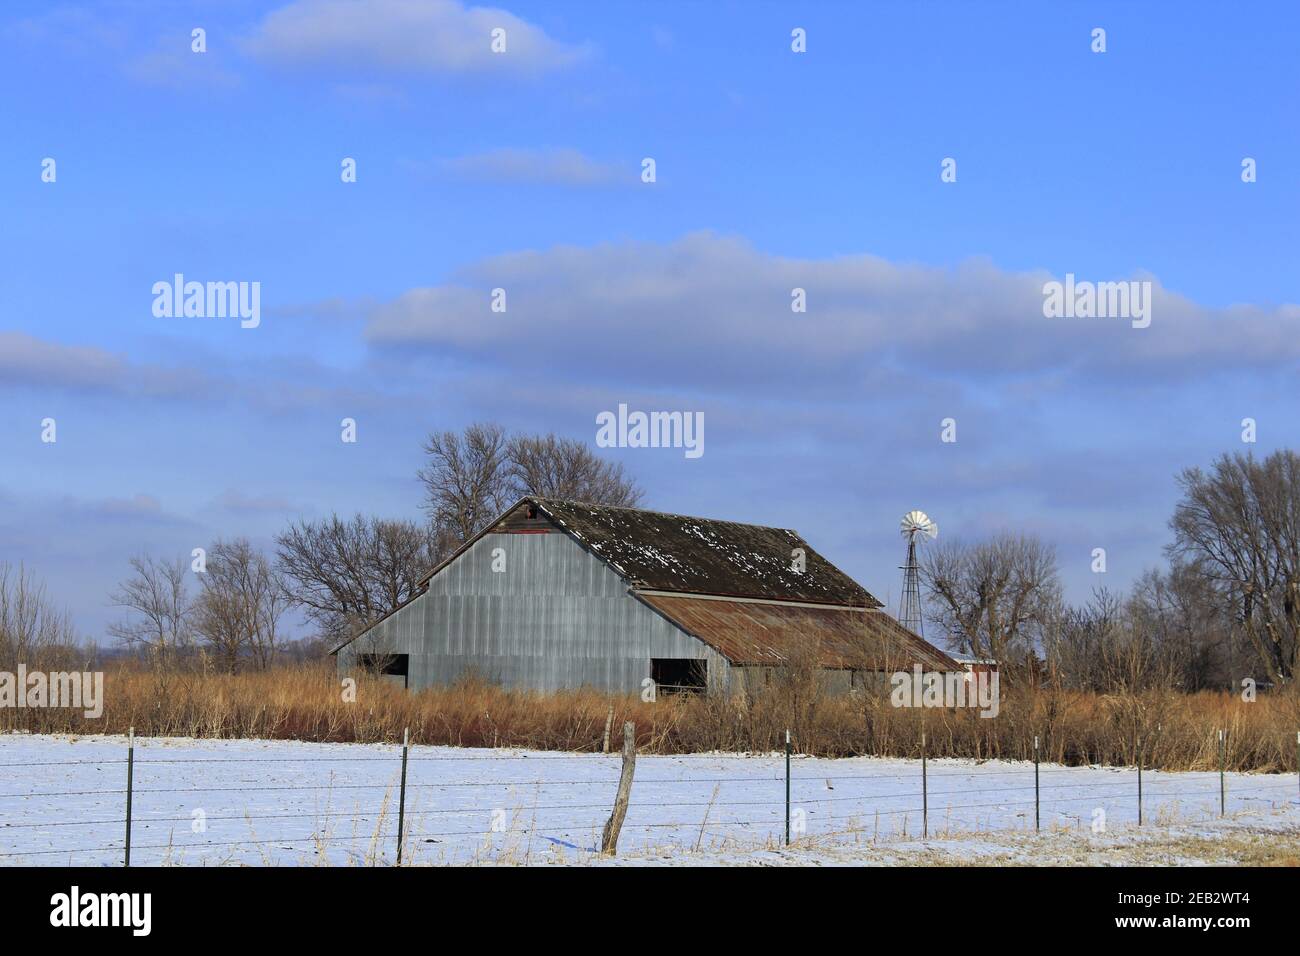 Kansas Country Barn with snow, fence, blue sky and clouds out in the country that's bright and colorful. Stock Photo